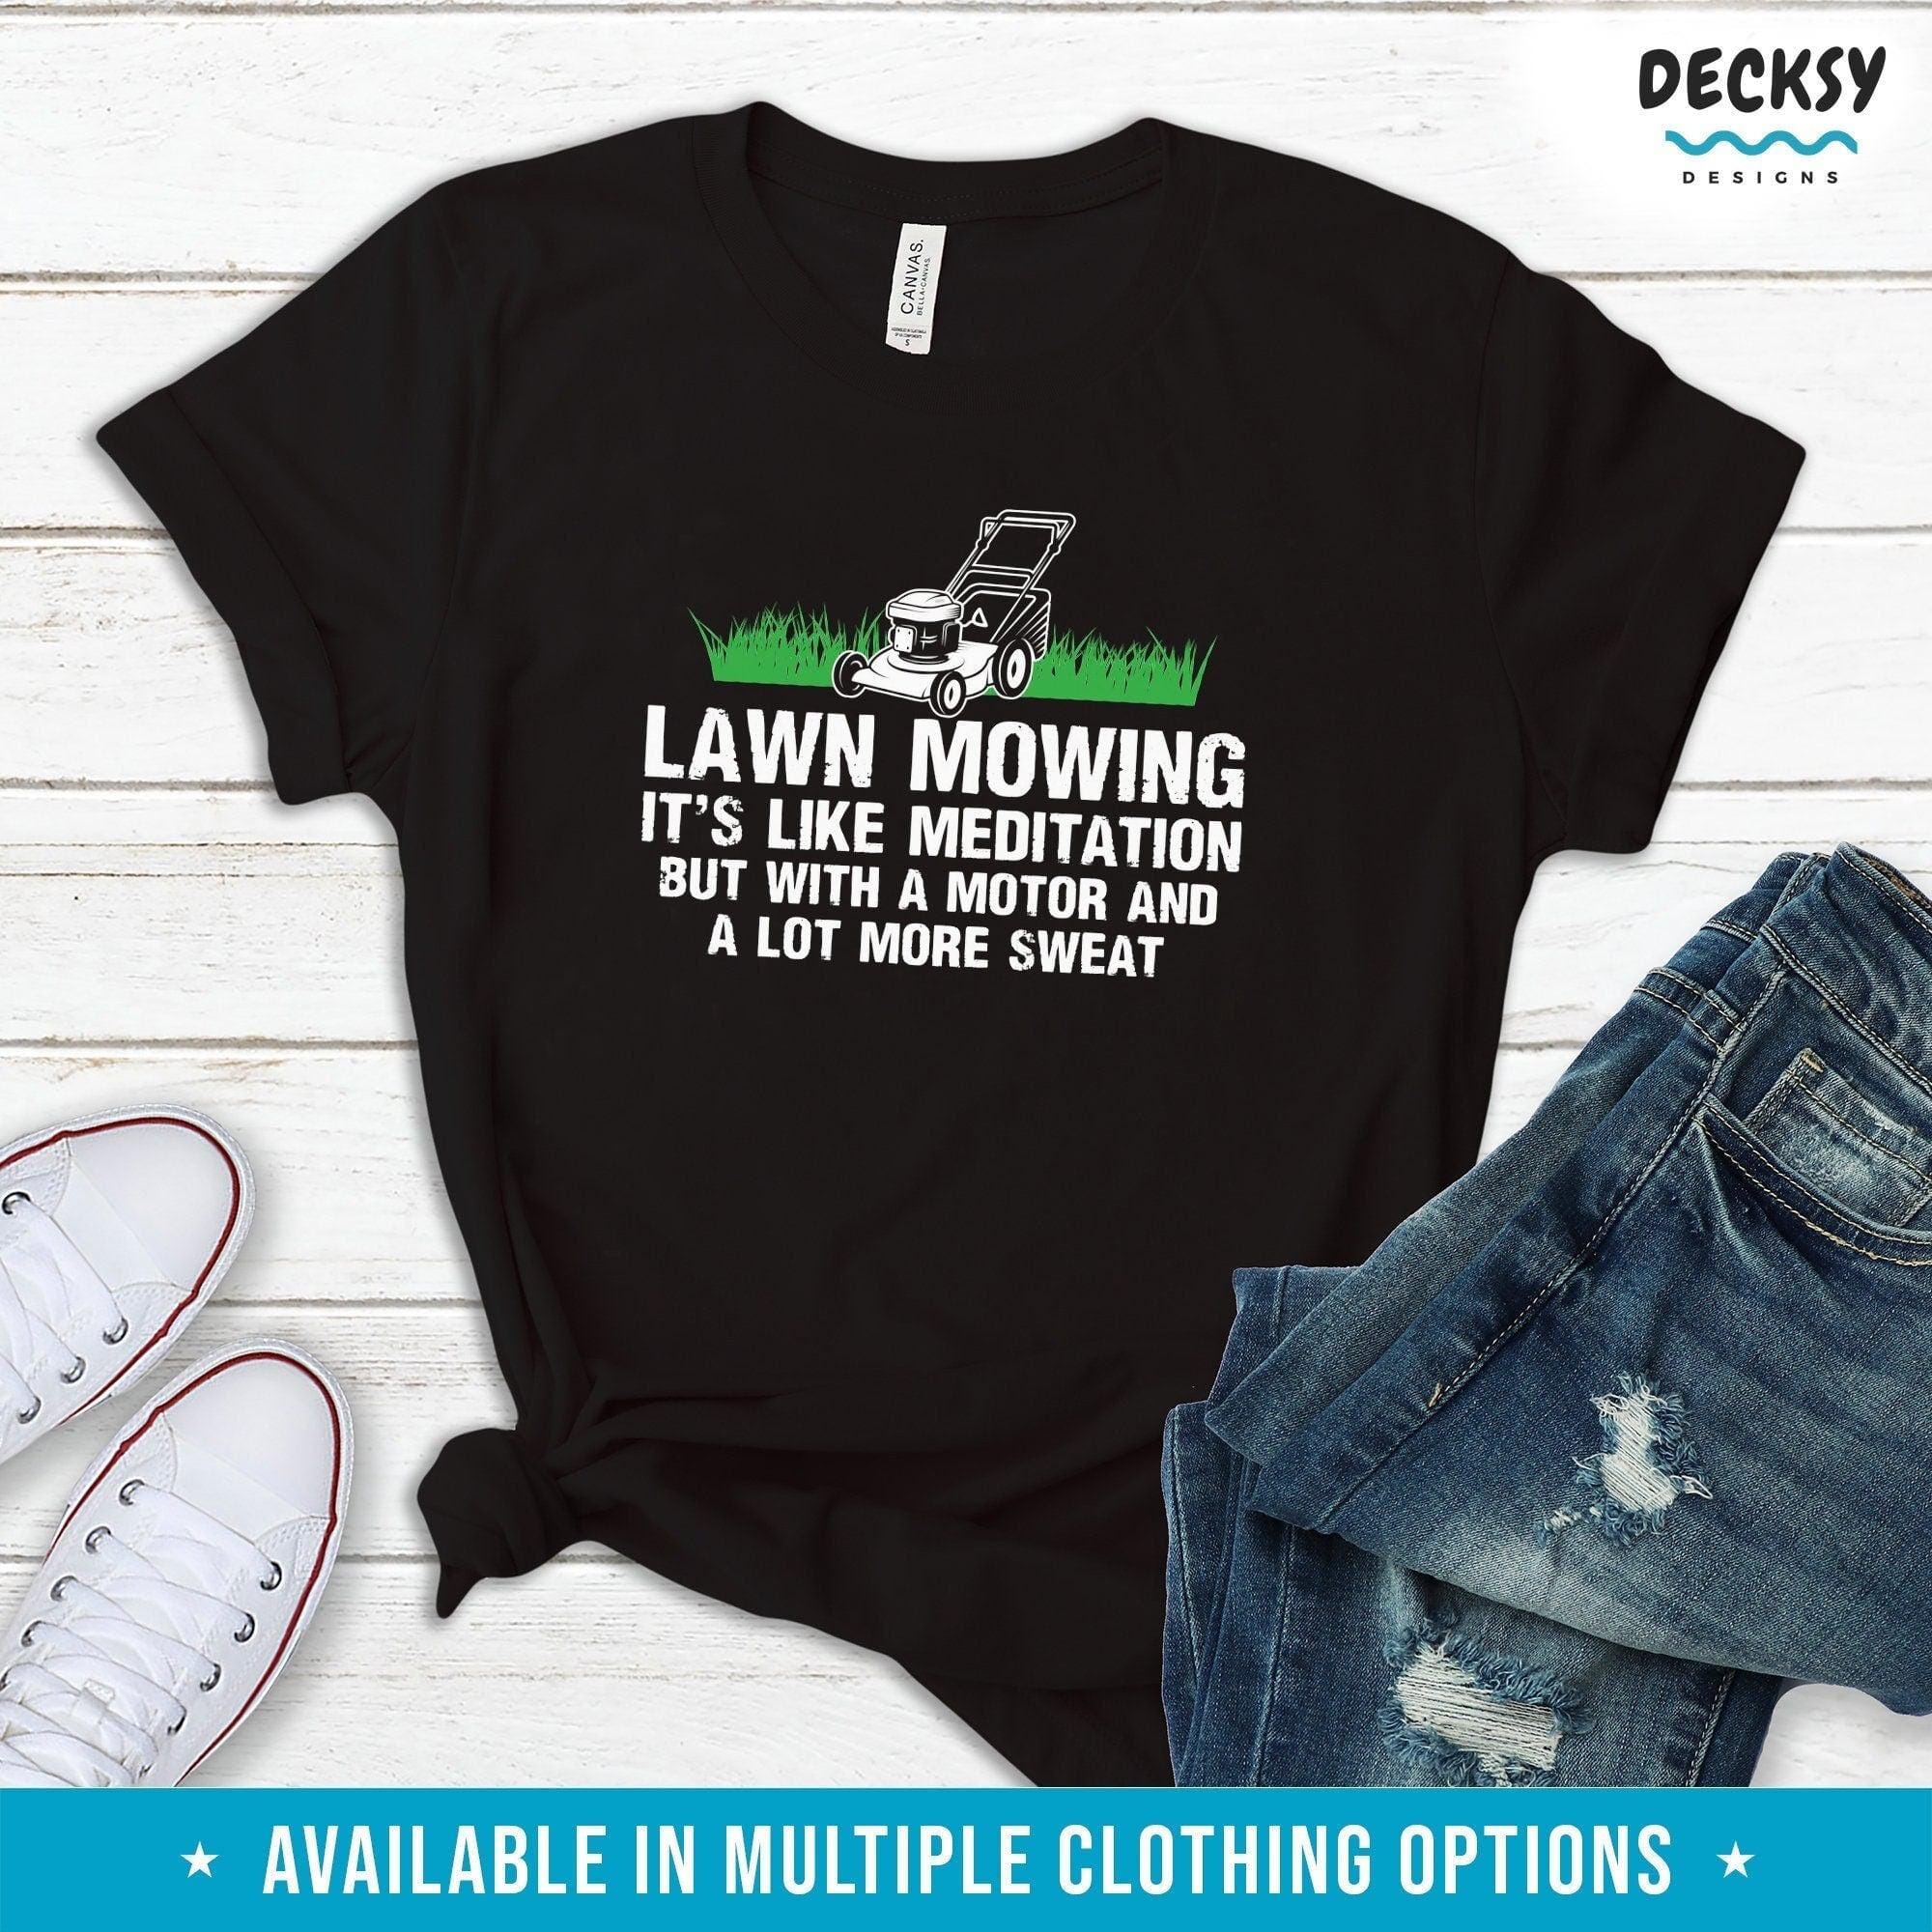 Lawn Mowing Shirt, Gift for Landscaper-Clothing:Gender-Neutral Adult Clothing:Tops & Tees:T-shirts:Graphic Tees-DecksyDesigns